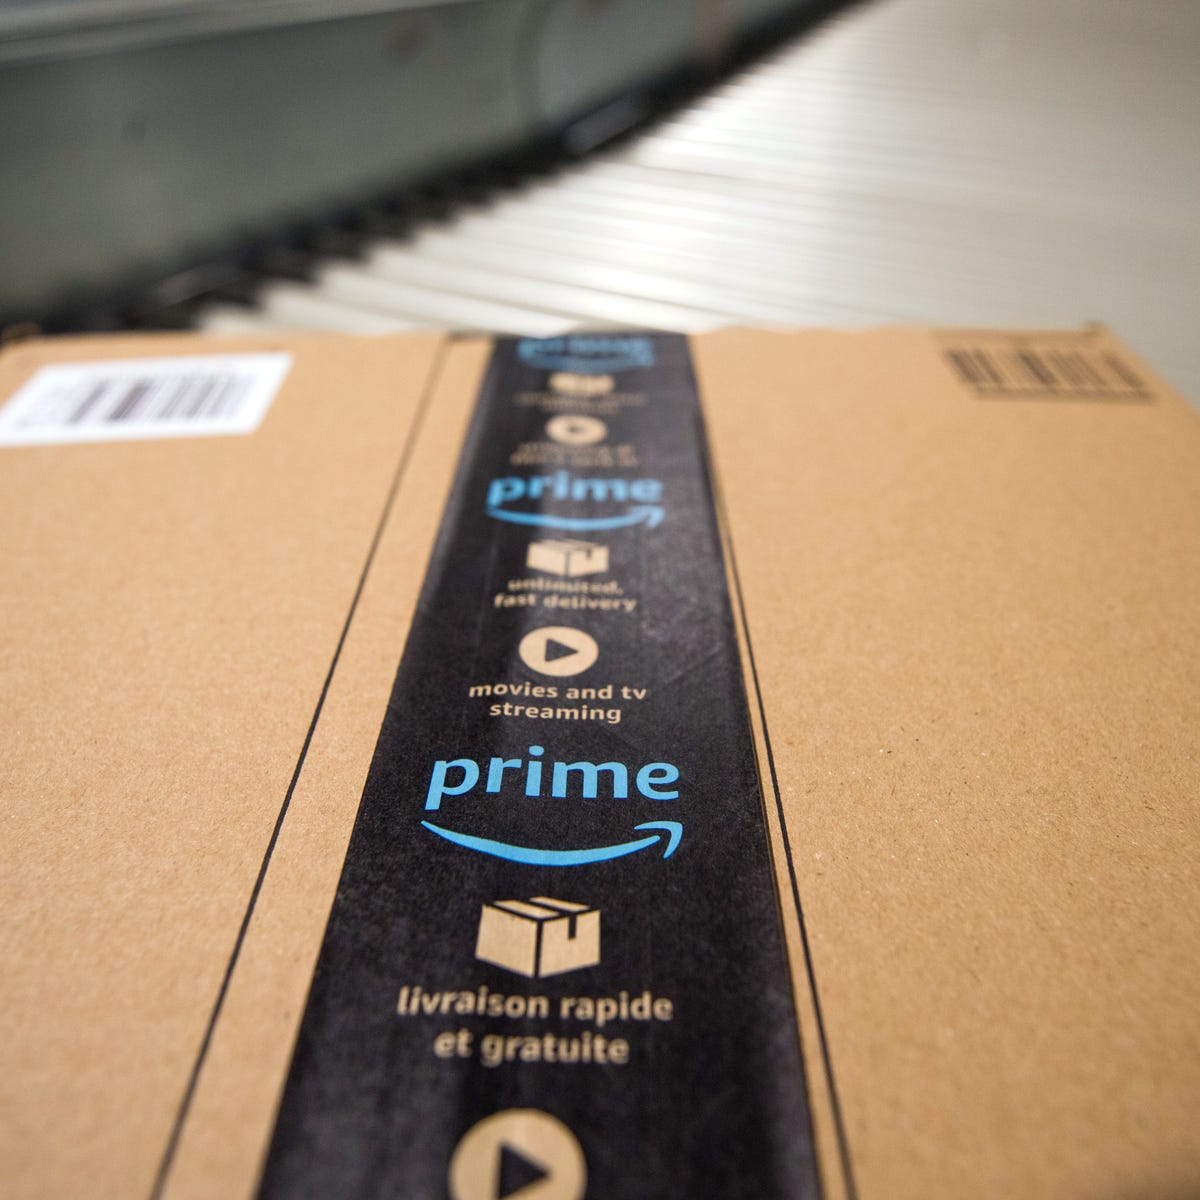 is Taking Prime Delivery Beyond its Own Website - CNET